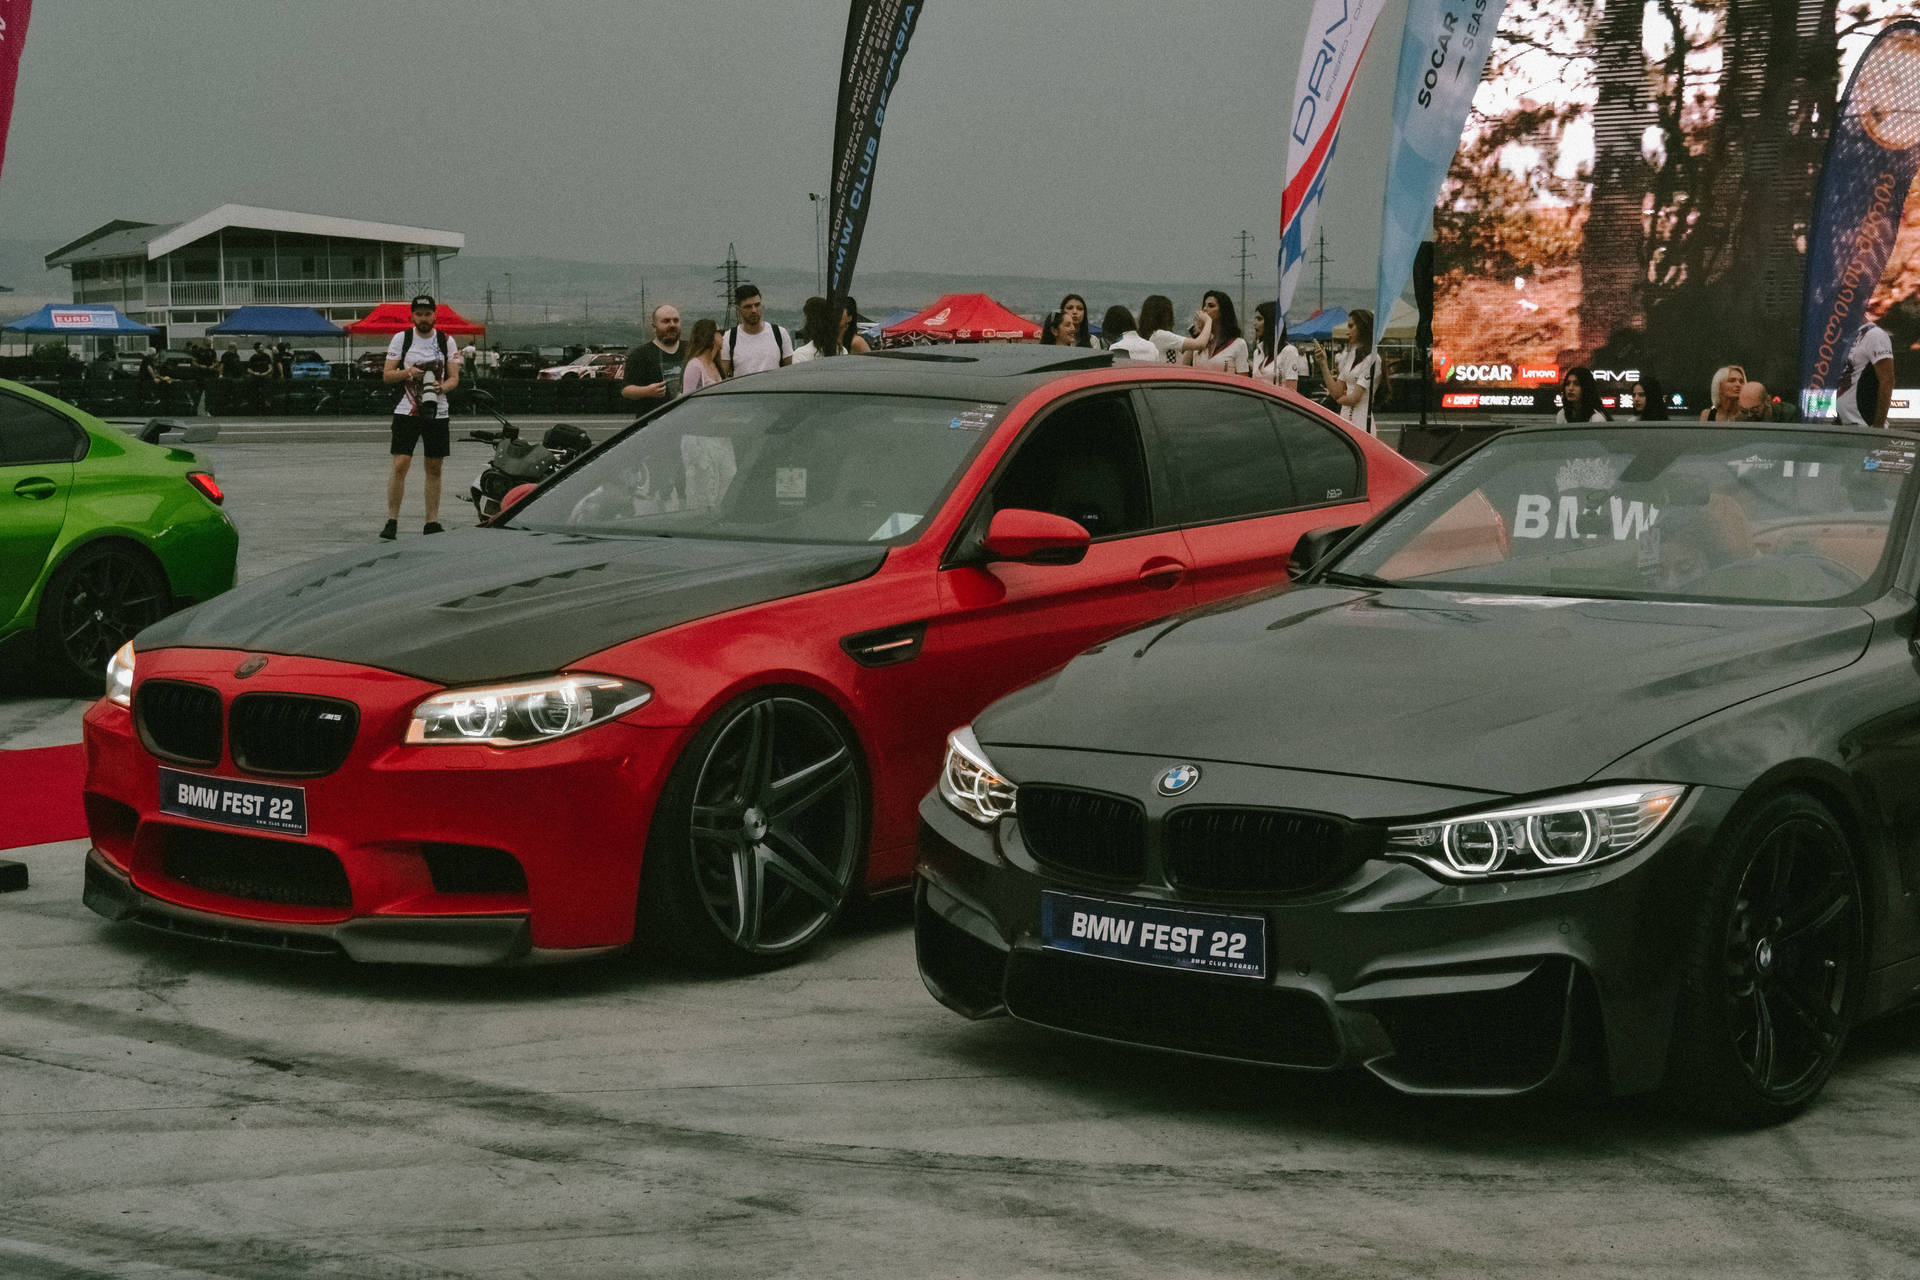 BMW M5 And F33 Racing Track Wallpaper